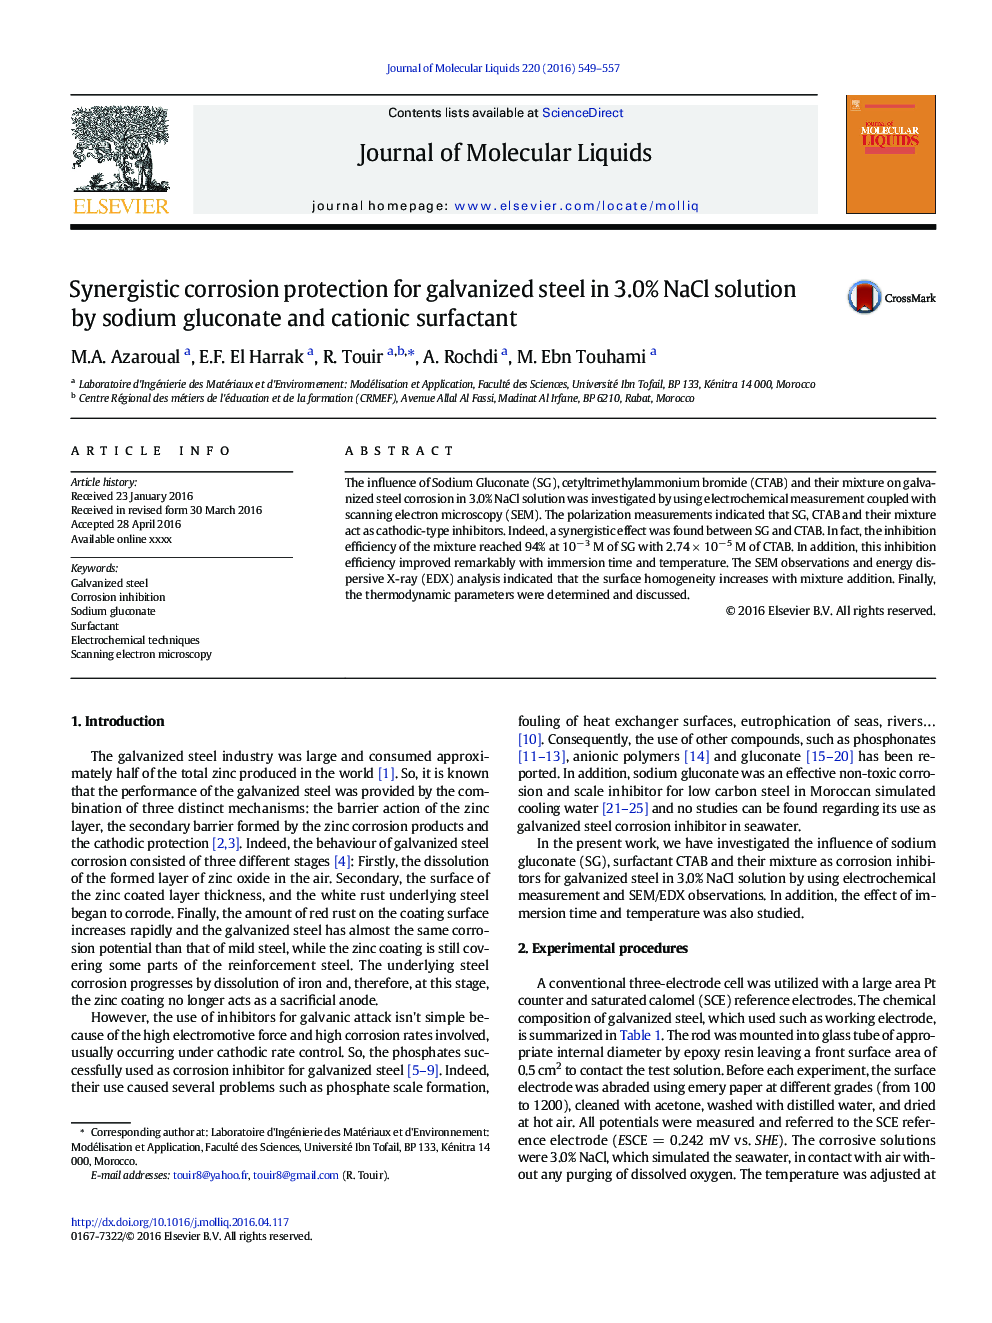 Synergistic corrosion protection for galvanized steel in 3.0% NaCl solution by sodium gluconate and cationic surfactant